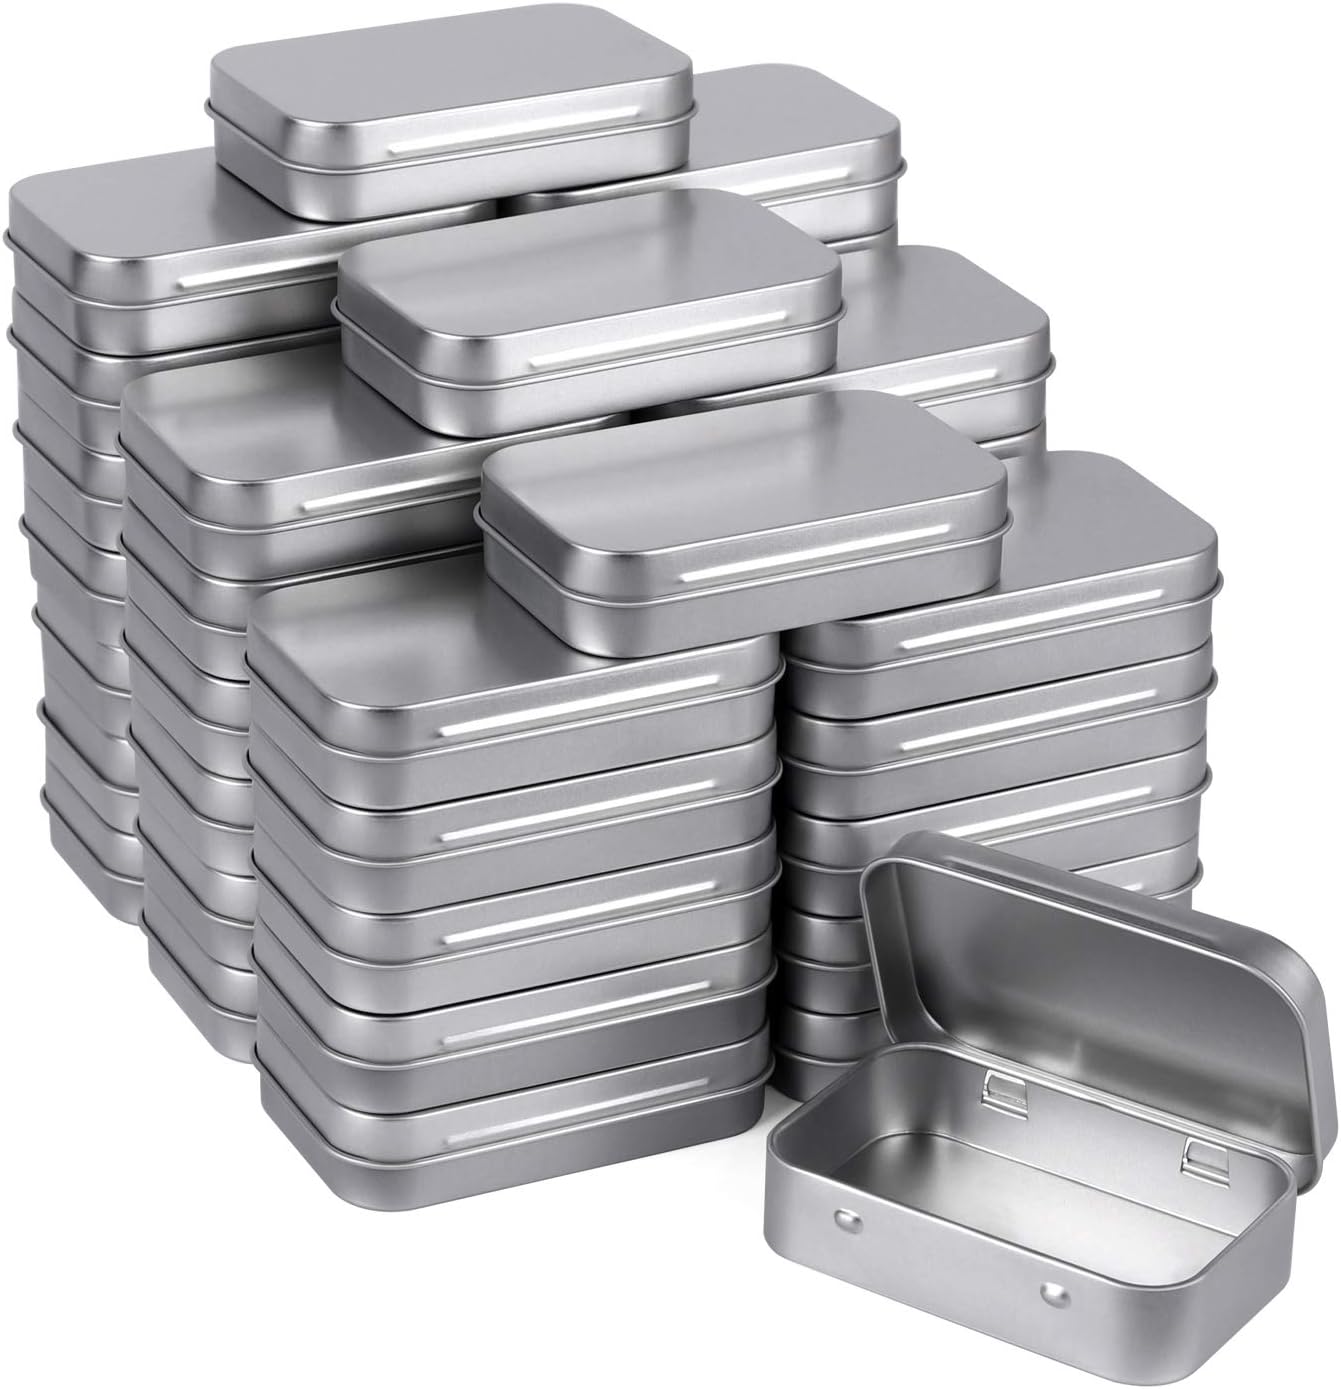 Tamicy Metal Rectangular Empty Hinged Tins - Pack of 40 Silver Mini Portable Box Small Storage Kit & Home Organizer with lids craft containers 3-1/2''X2-1/2''X4/5''